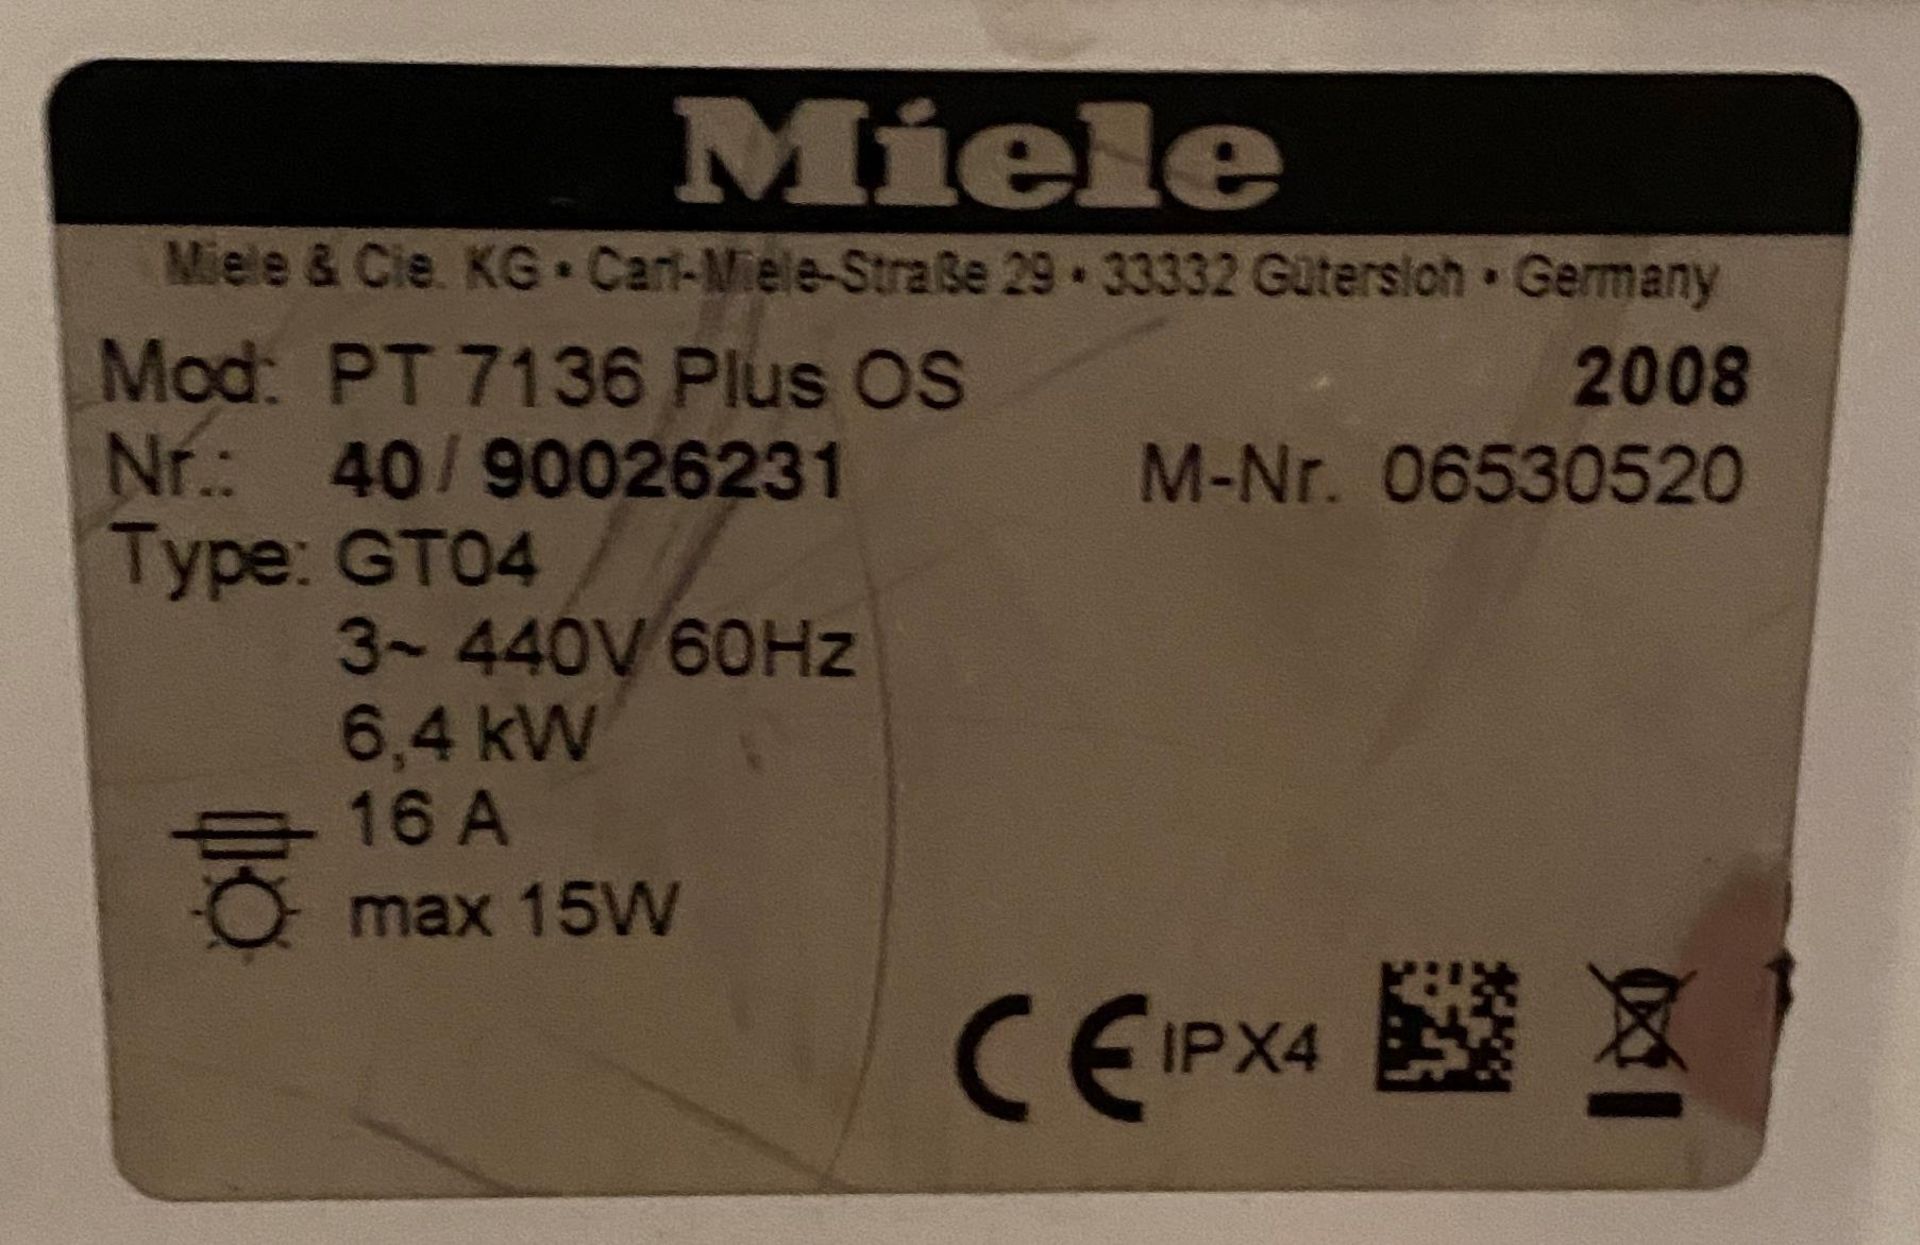 2 x Miele PT7136 Plus OS Electric Tumble Dryers DOM 2008 - Image 6 of 6